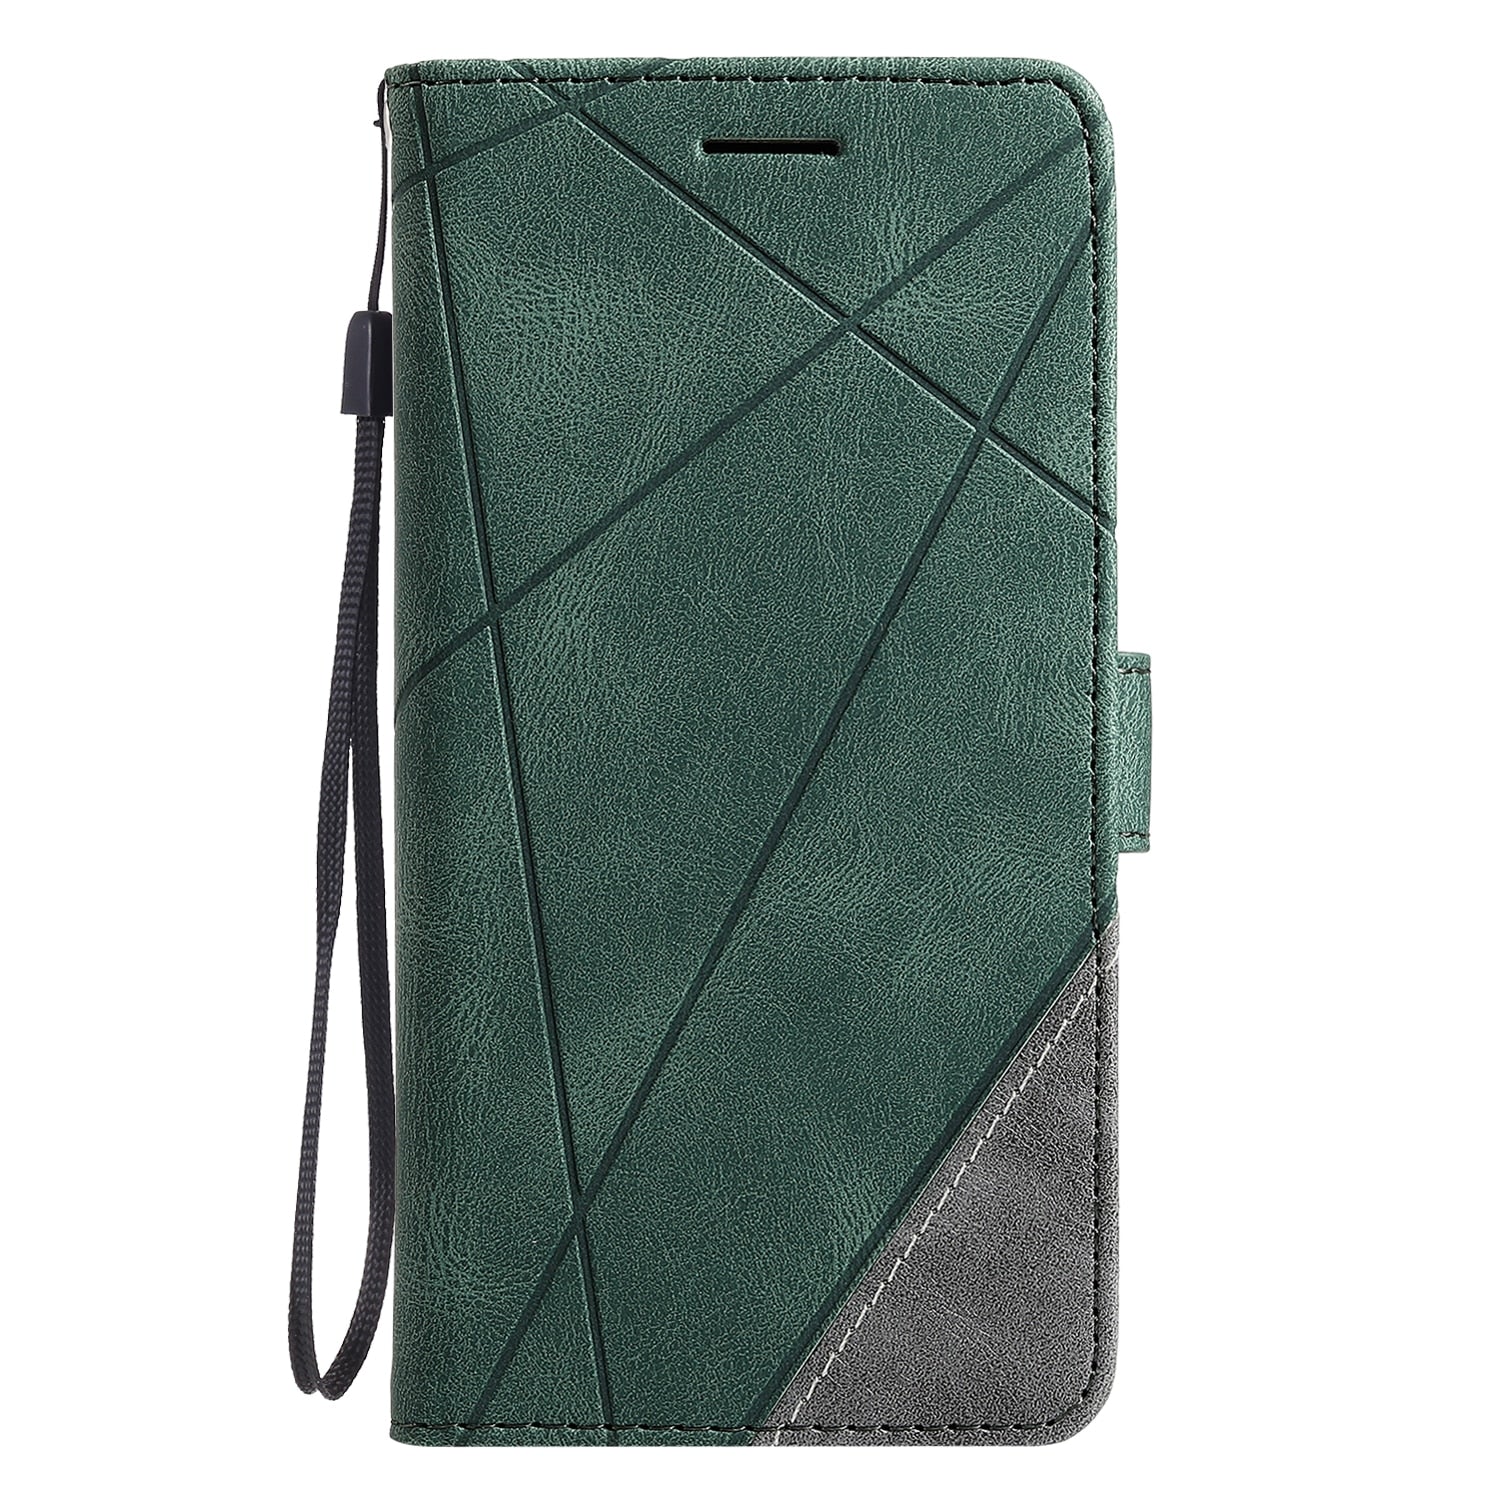 Wallet Flip Leather Shockproof Phone Case For iPhone